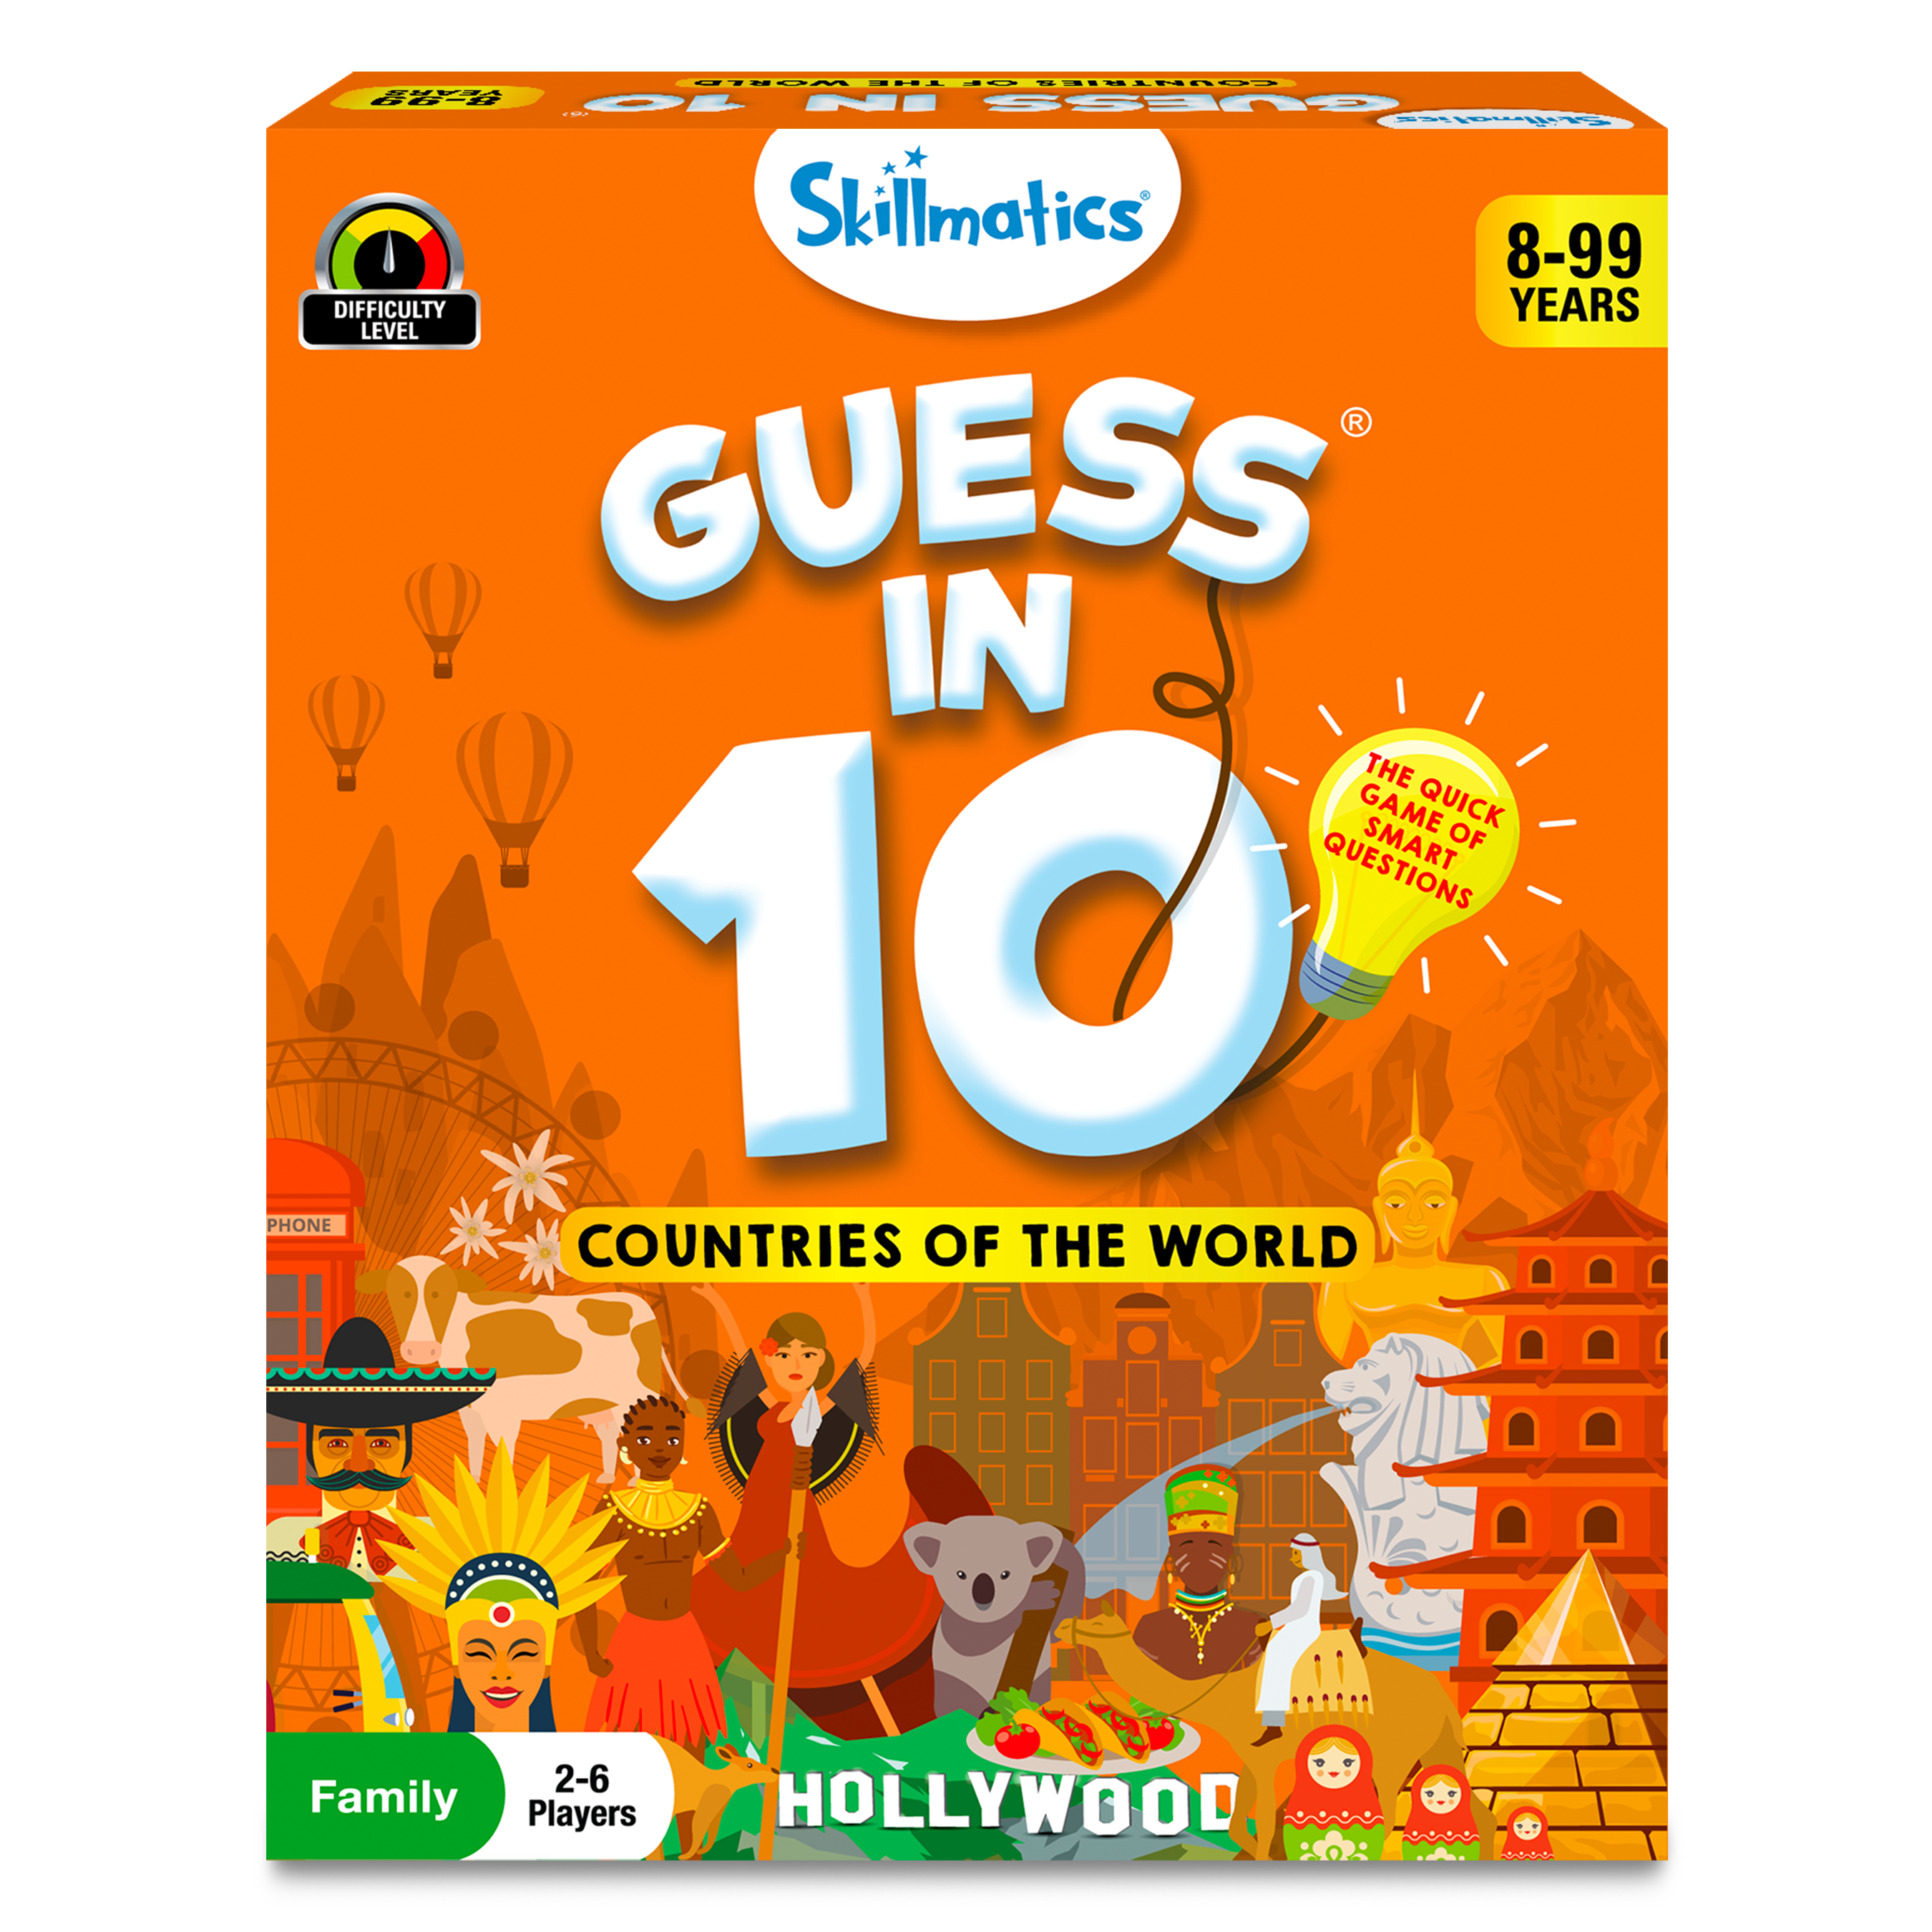 Guess in 10 – Countries Of The World | Card Game of Smart Questions